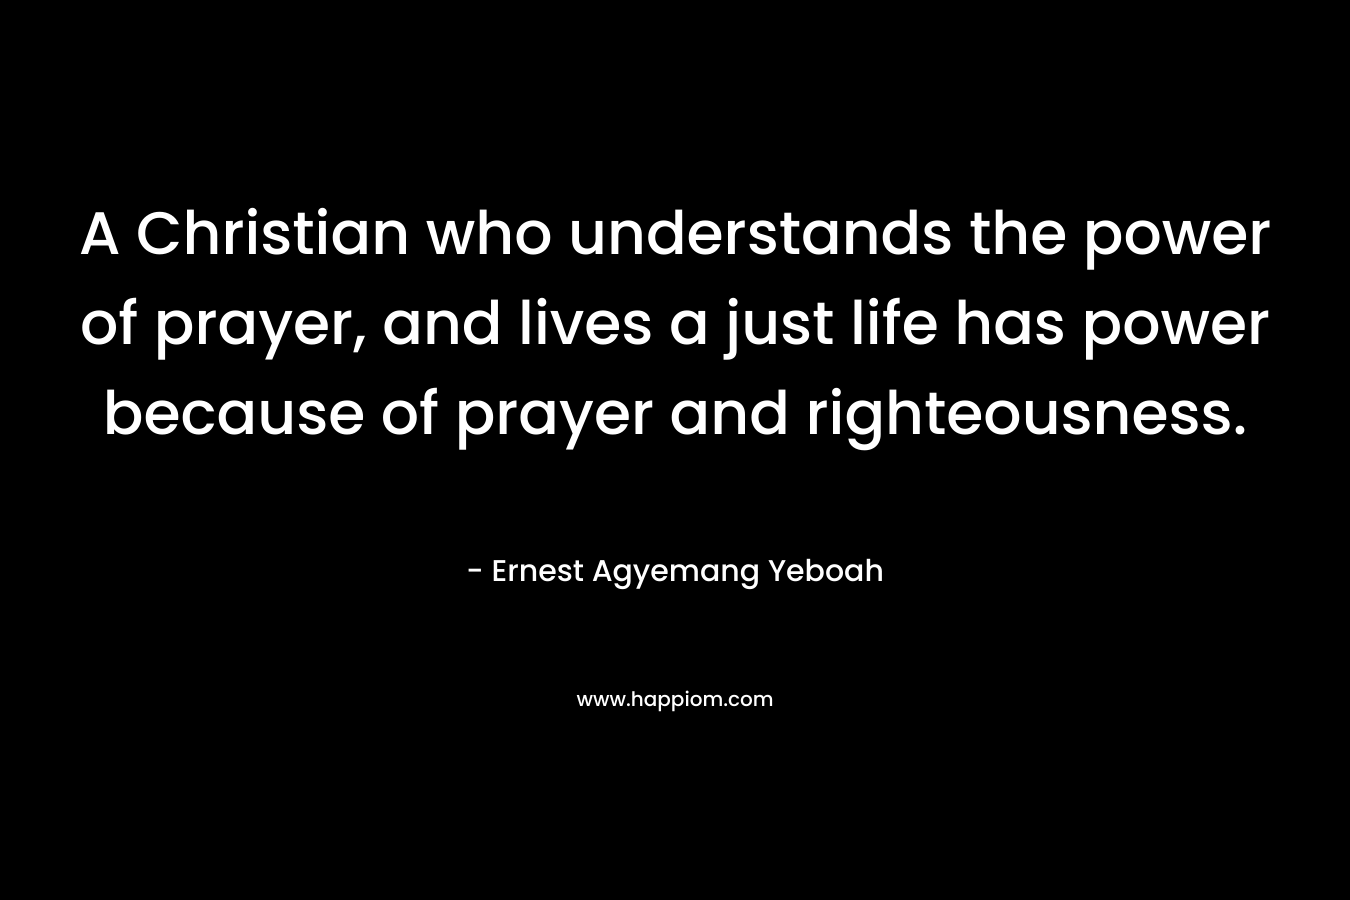 A Christian who understands the power of prayer, and lives a just life has power because of prayer and righteousness.